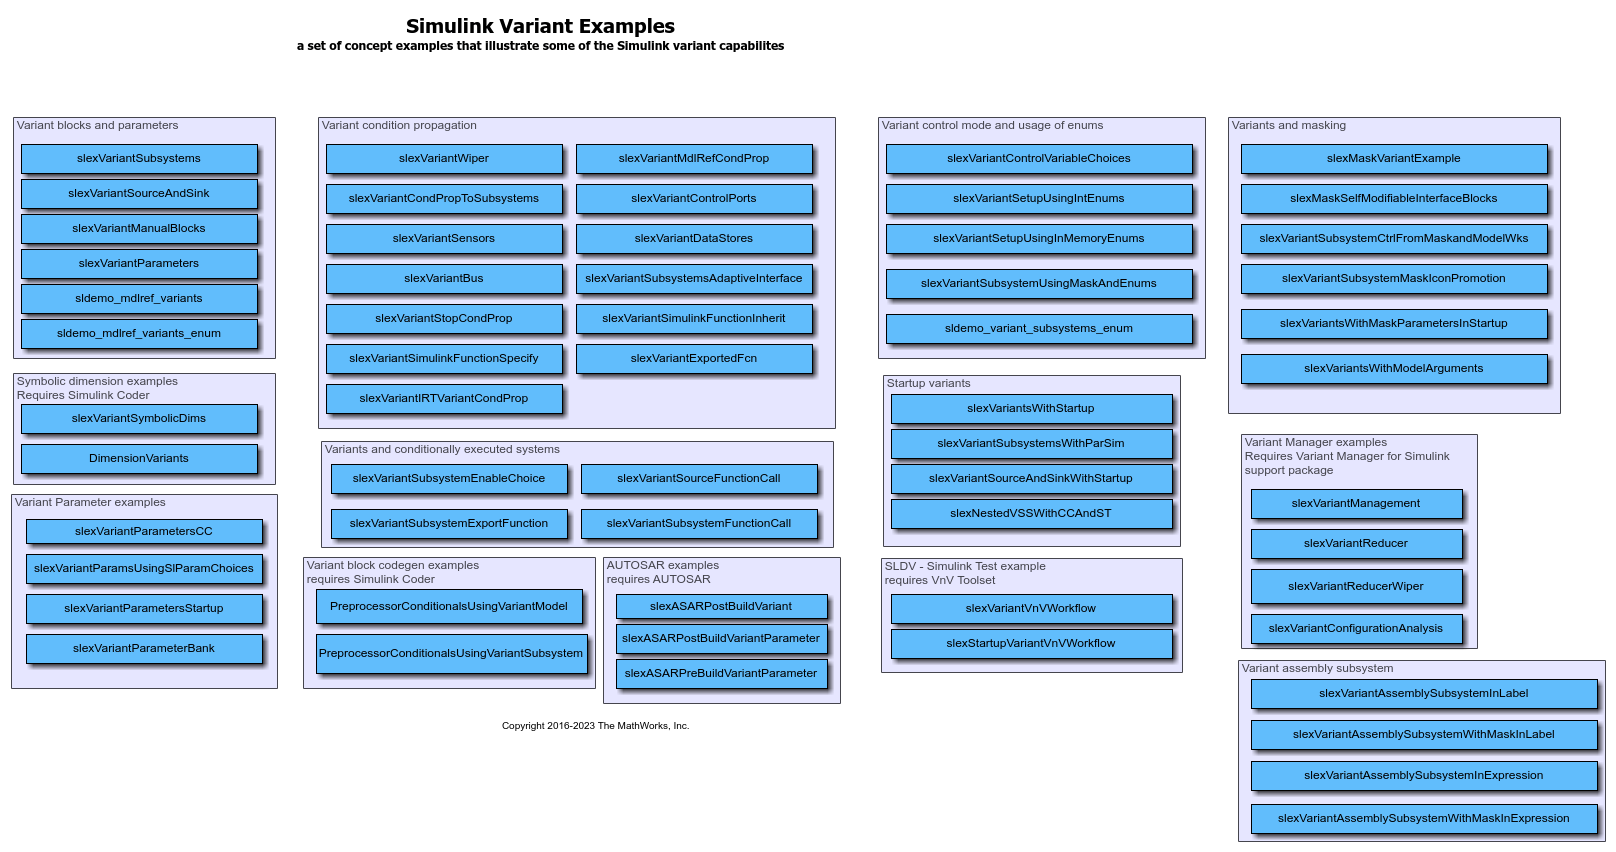 Simulink Variant Examples